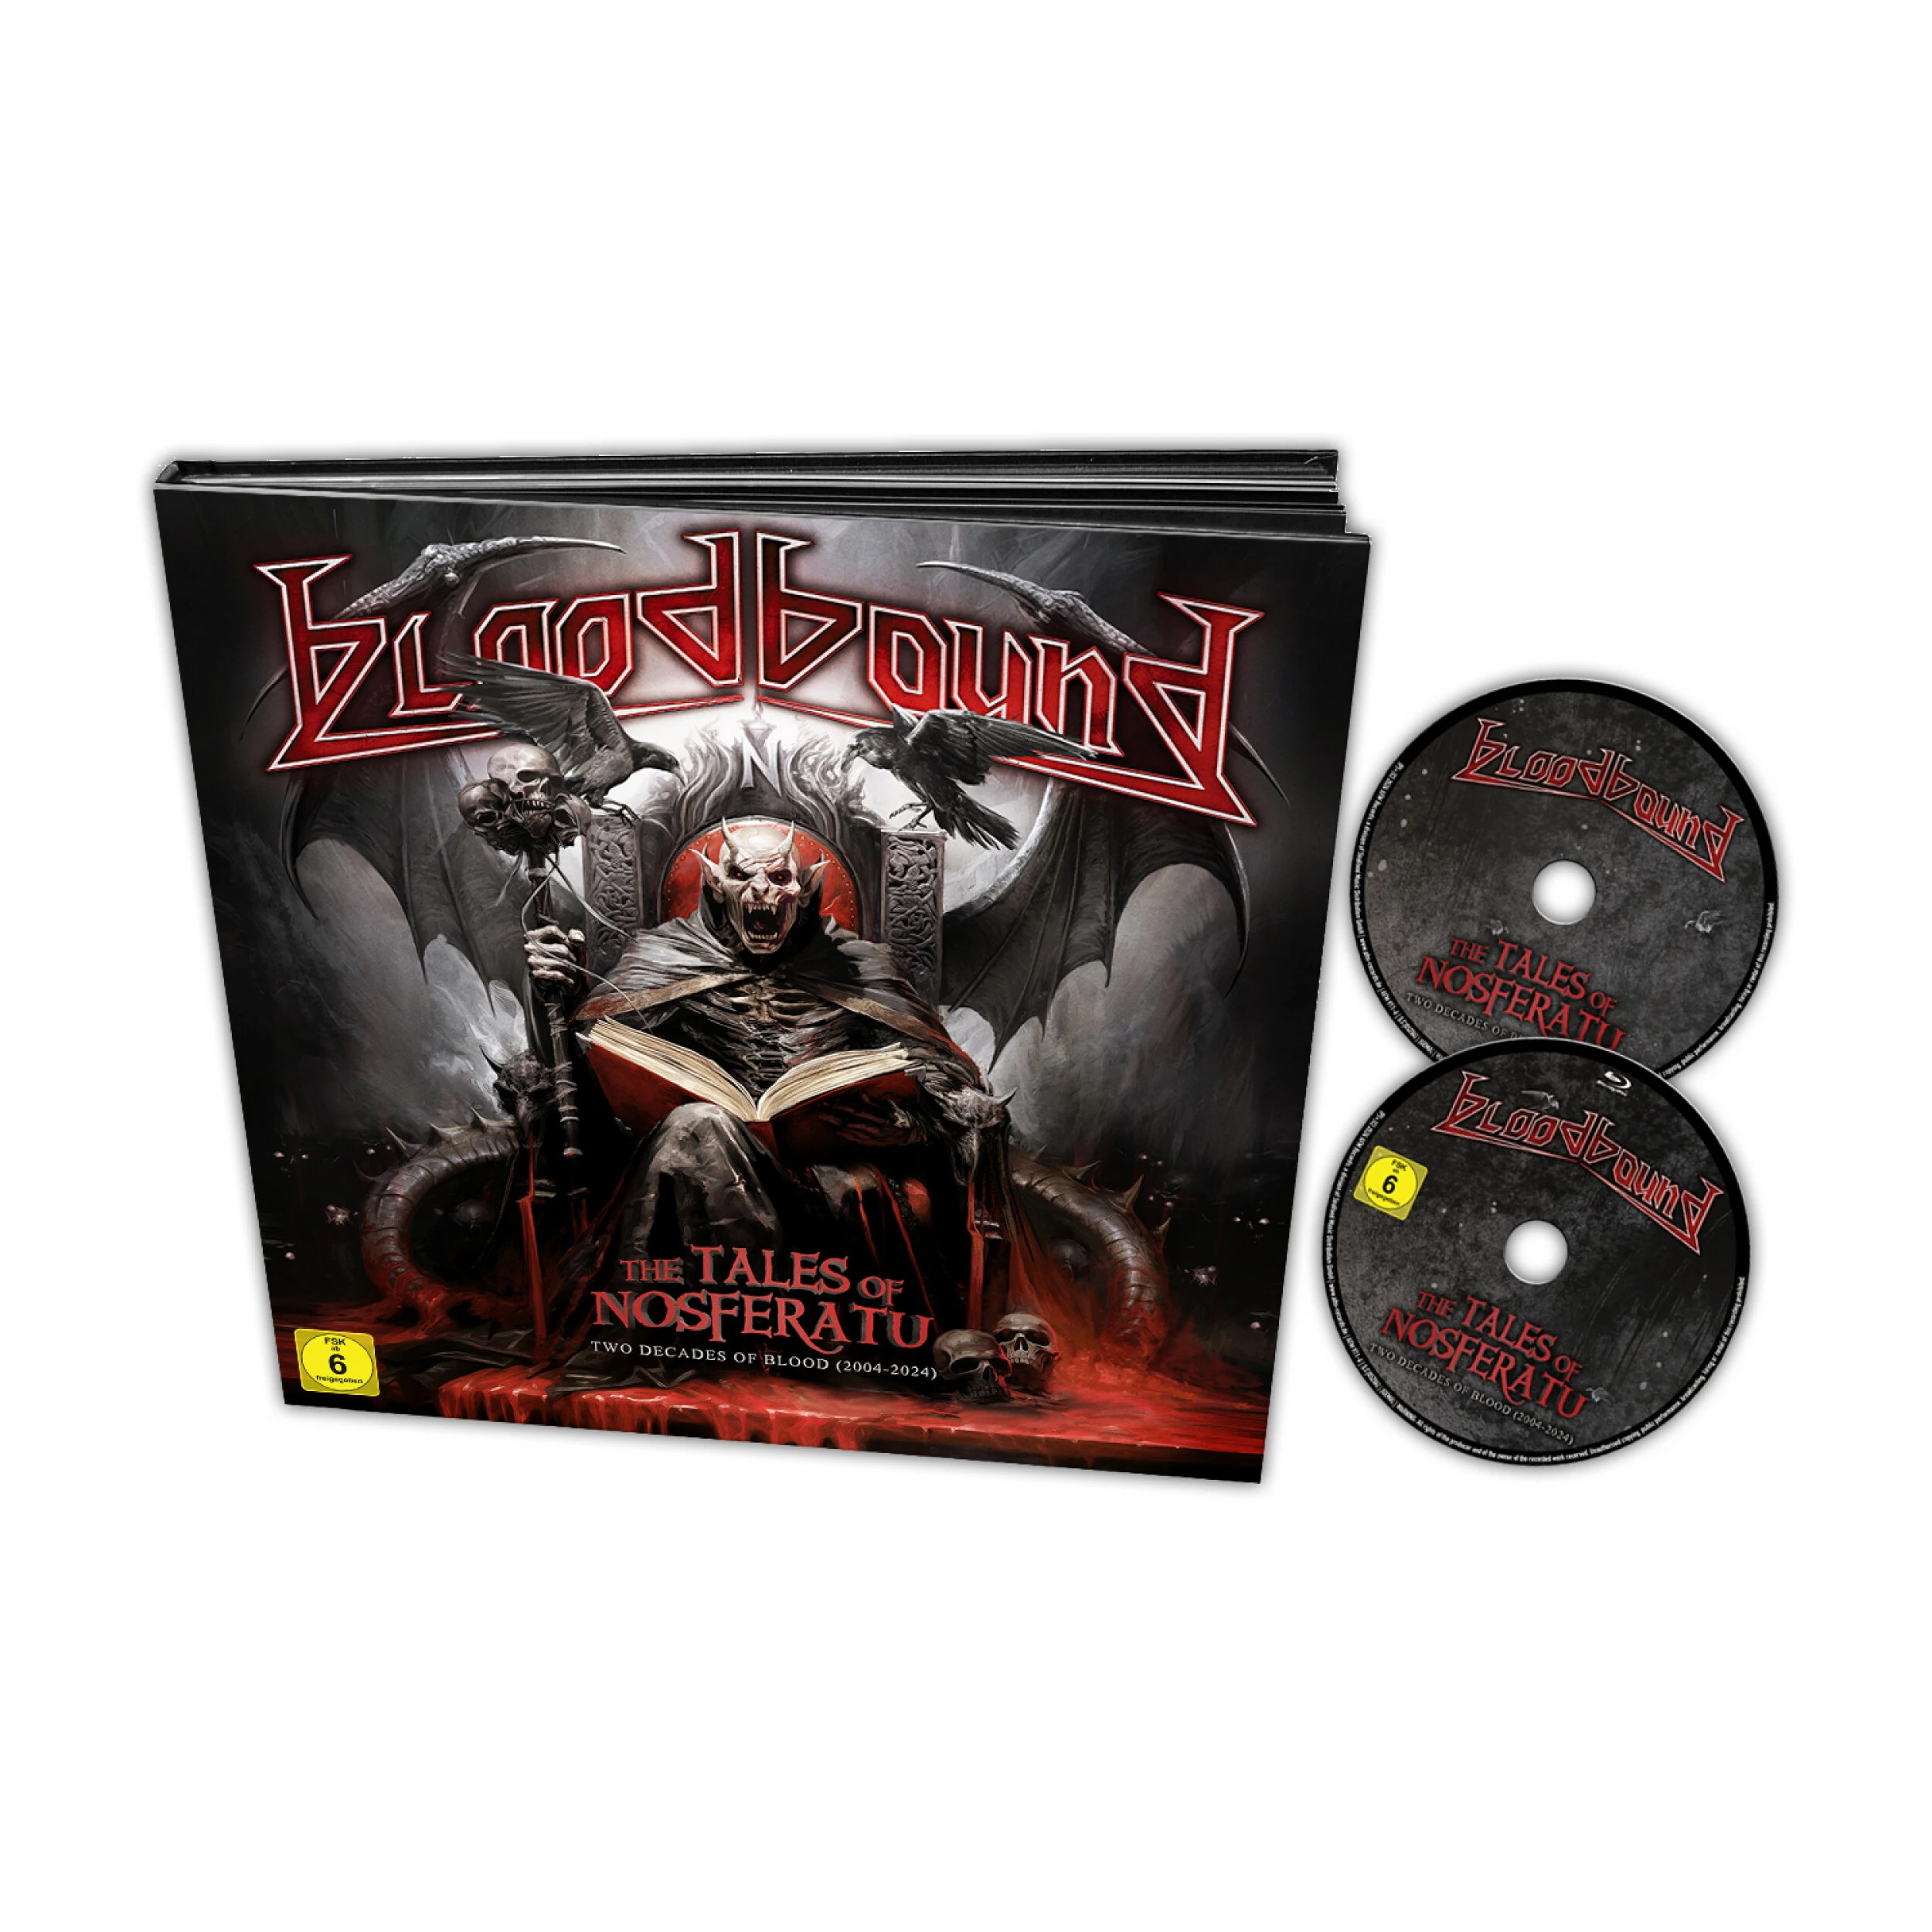 BLOODBOUND - The Tales of Nosferatu [CD+BLU-RAY EARBOOK]